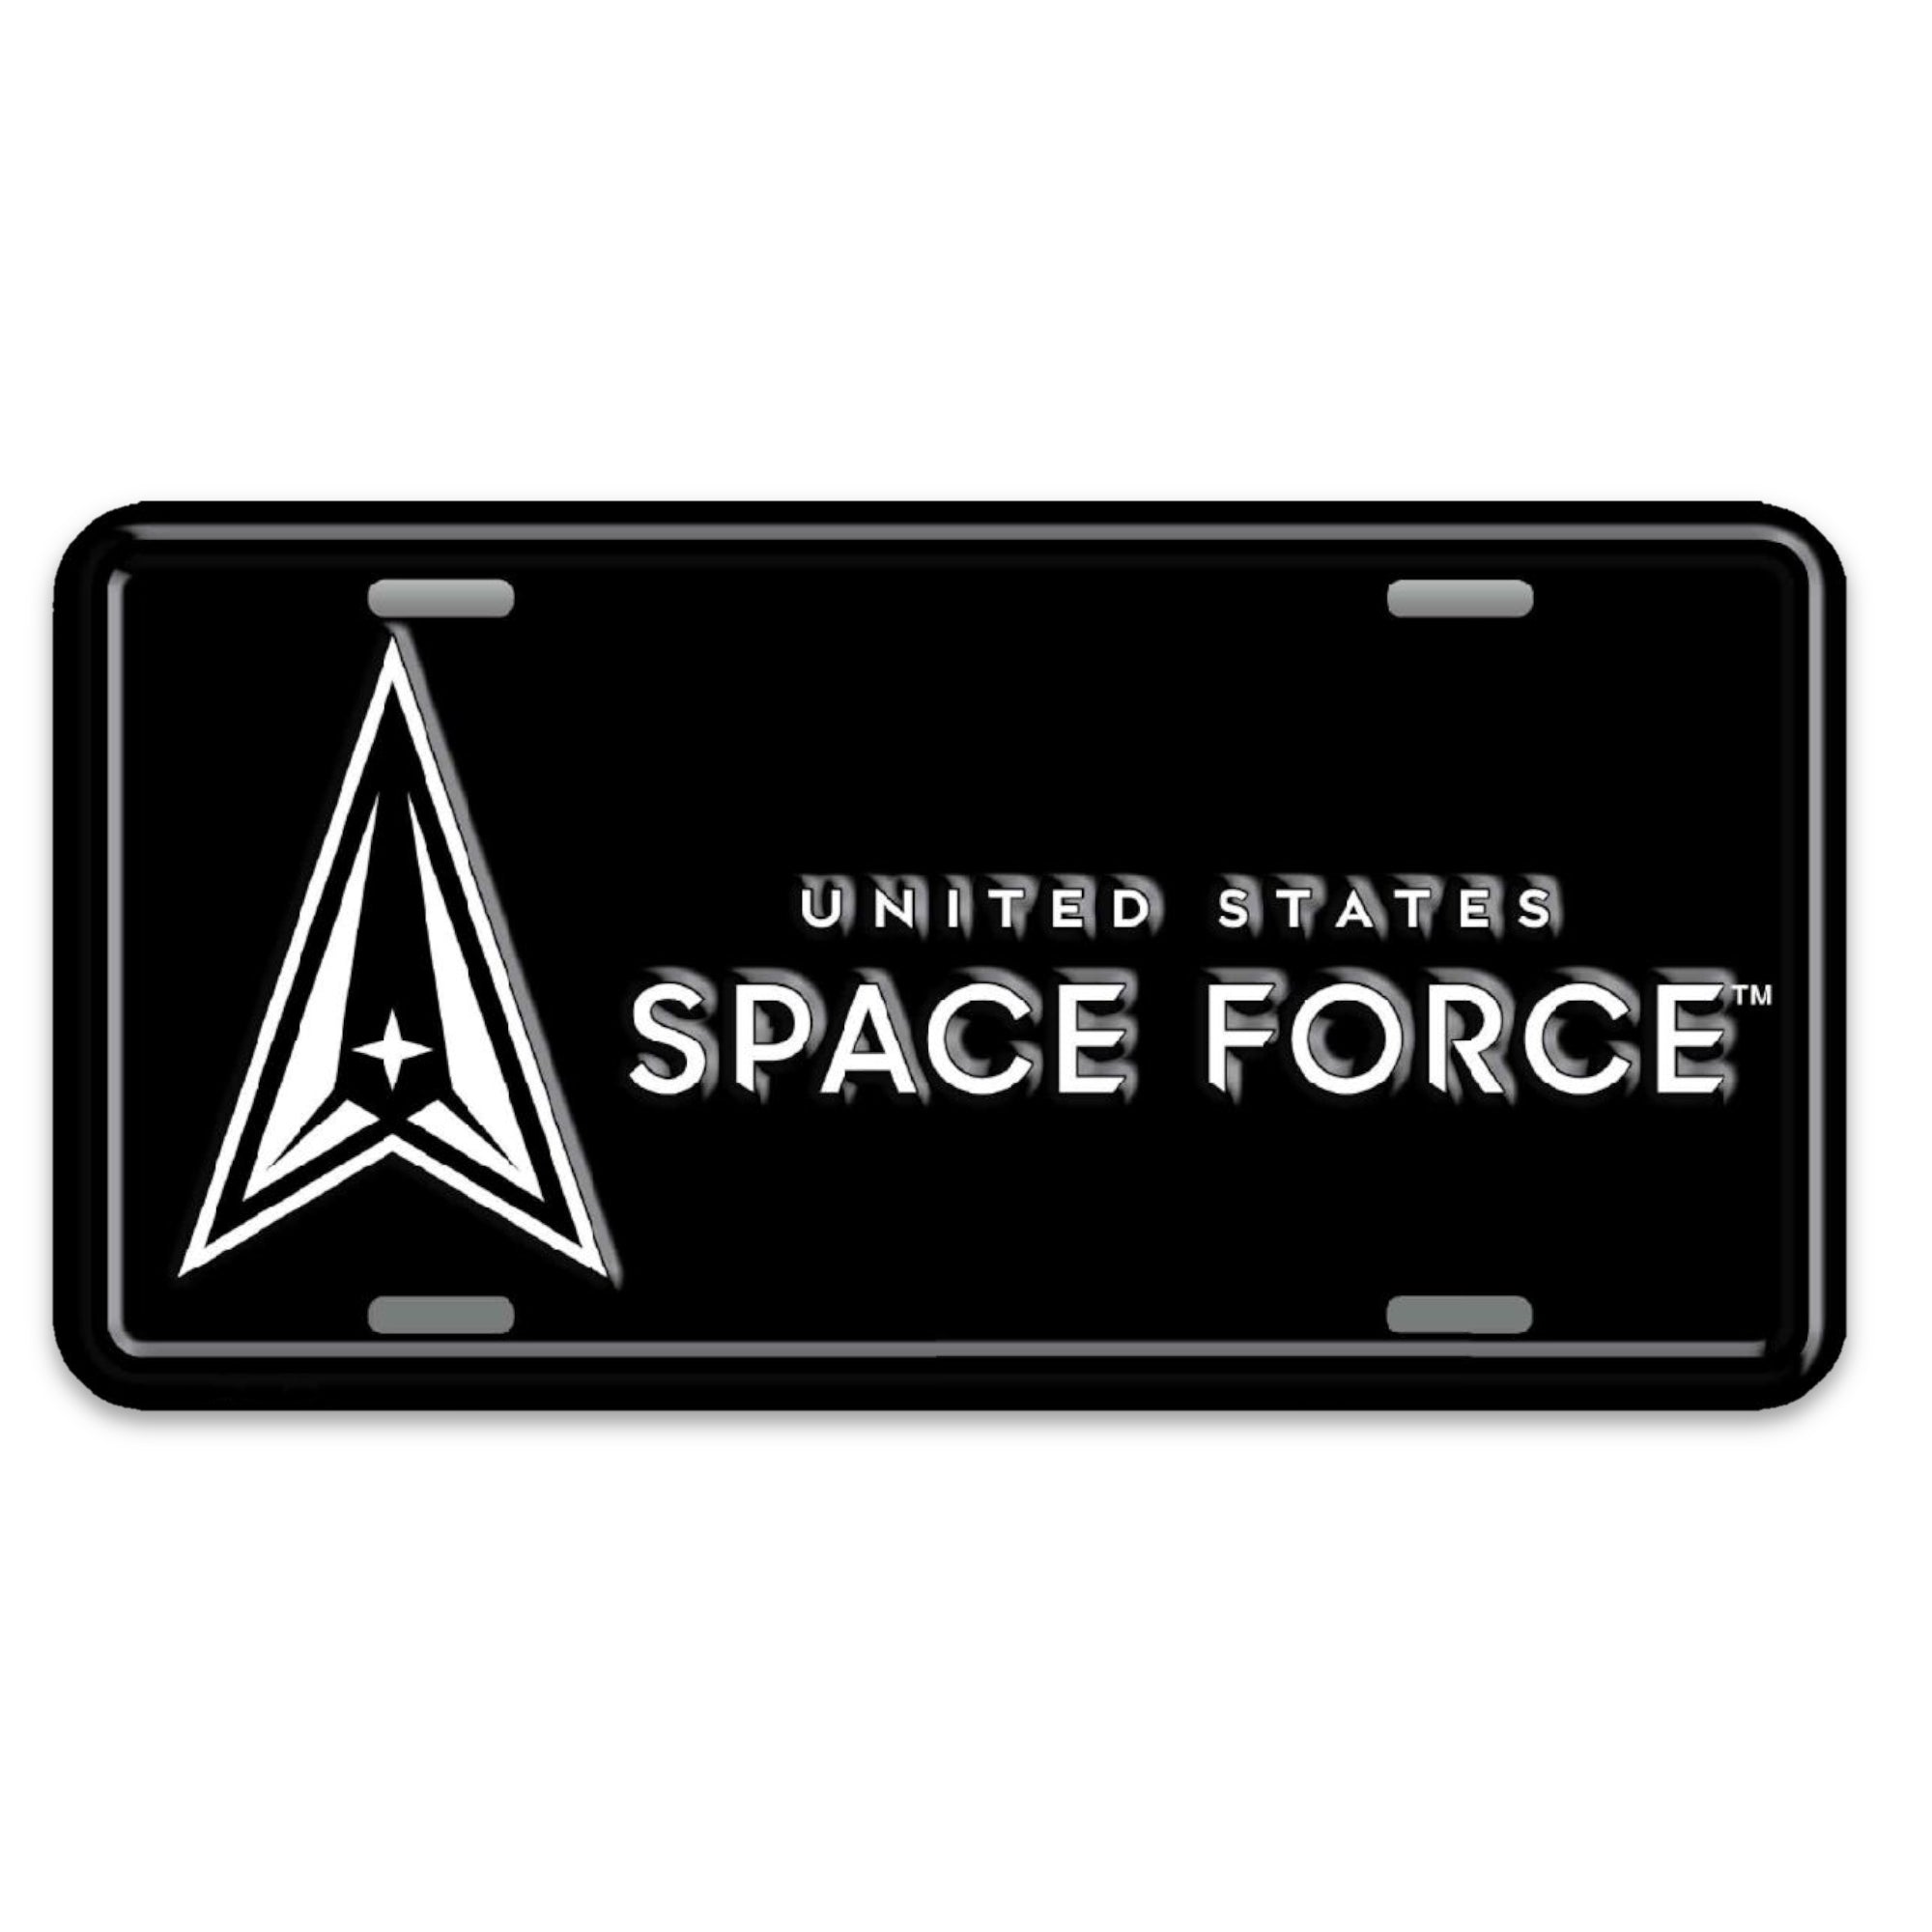 United States Space Force Mosaic License Plate (Black)